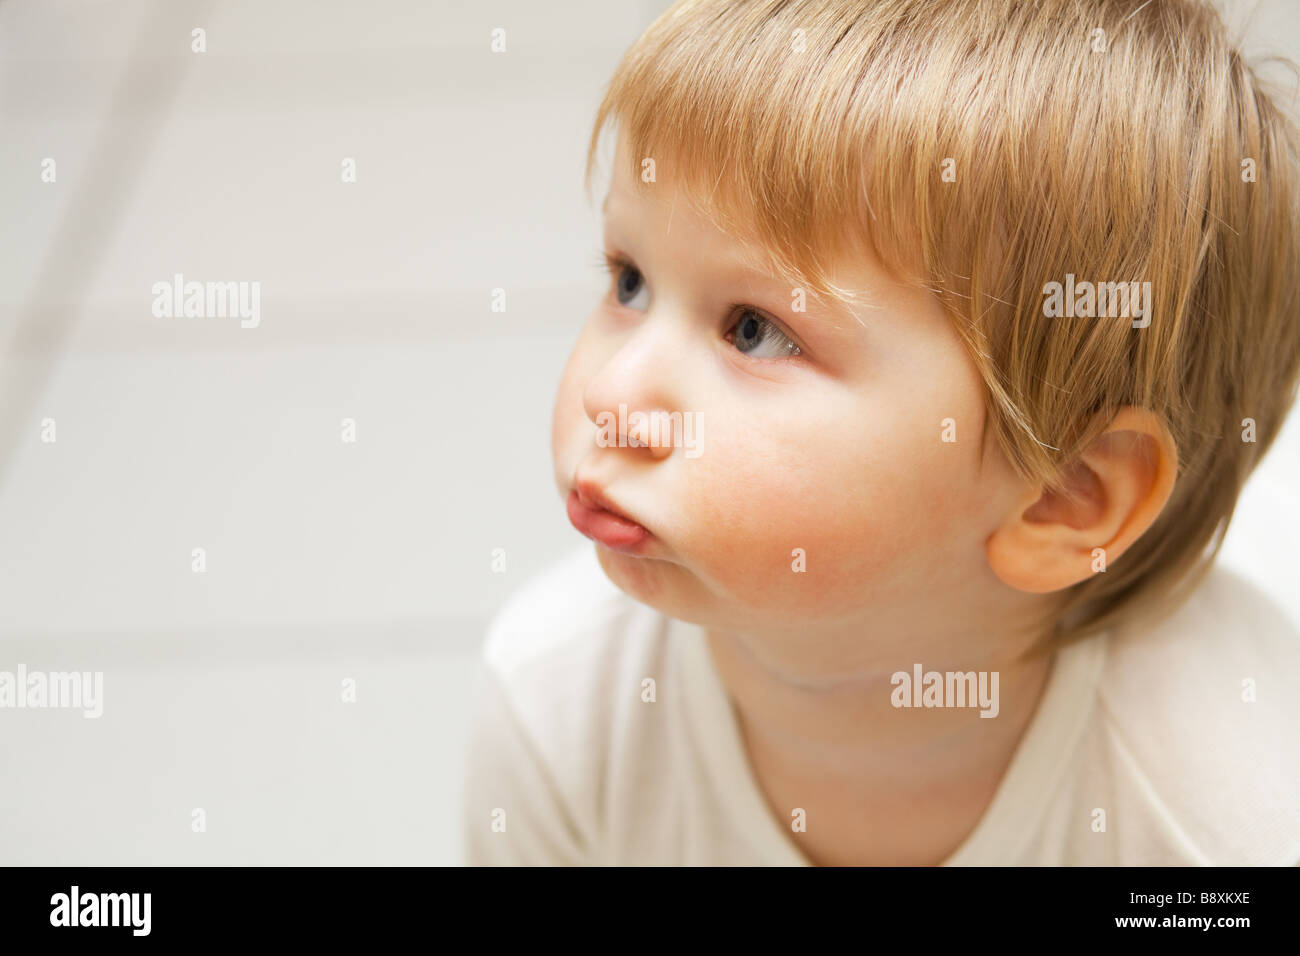 Indoor photo of little blond boy with puffed out cheeks Stock Photo